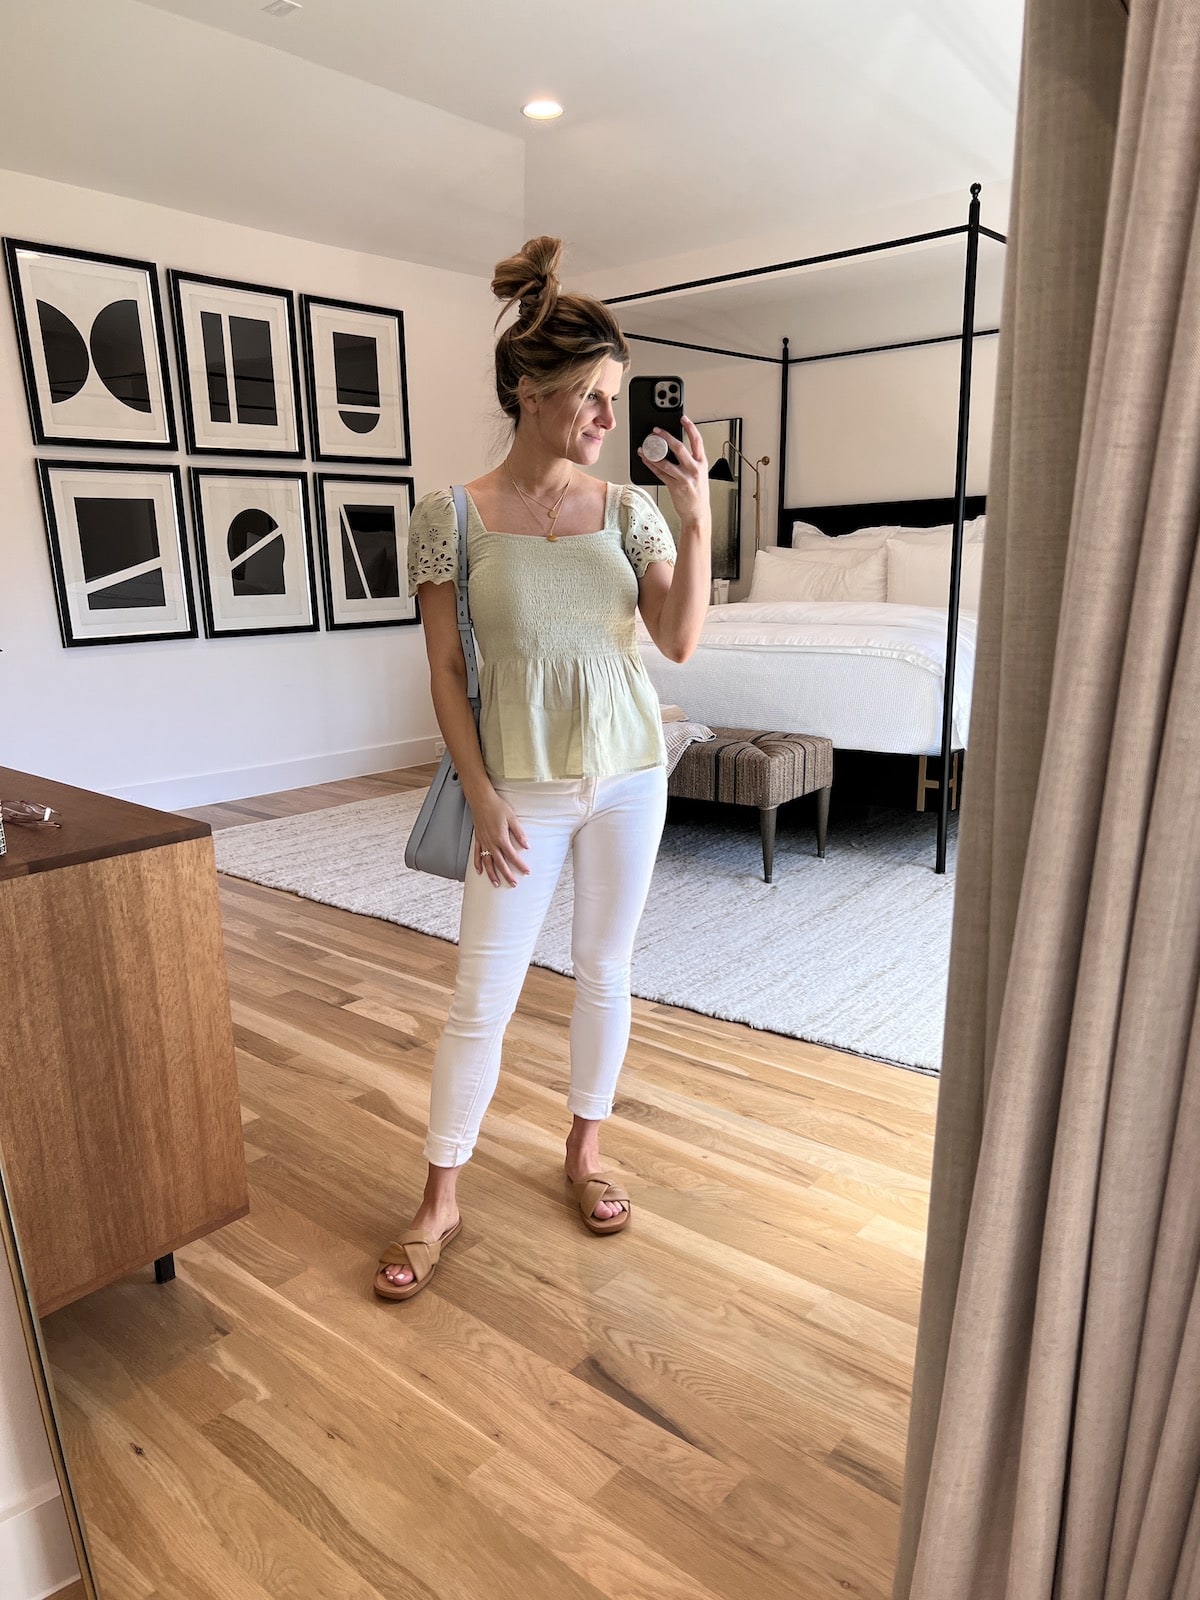 Brighton Butler wearing madewell white jeans and mint top